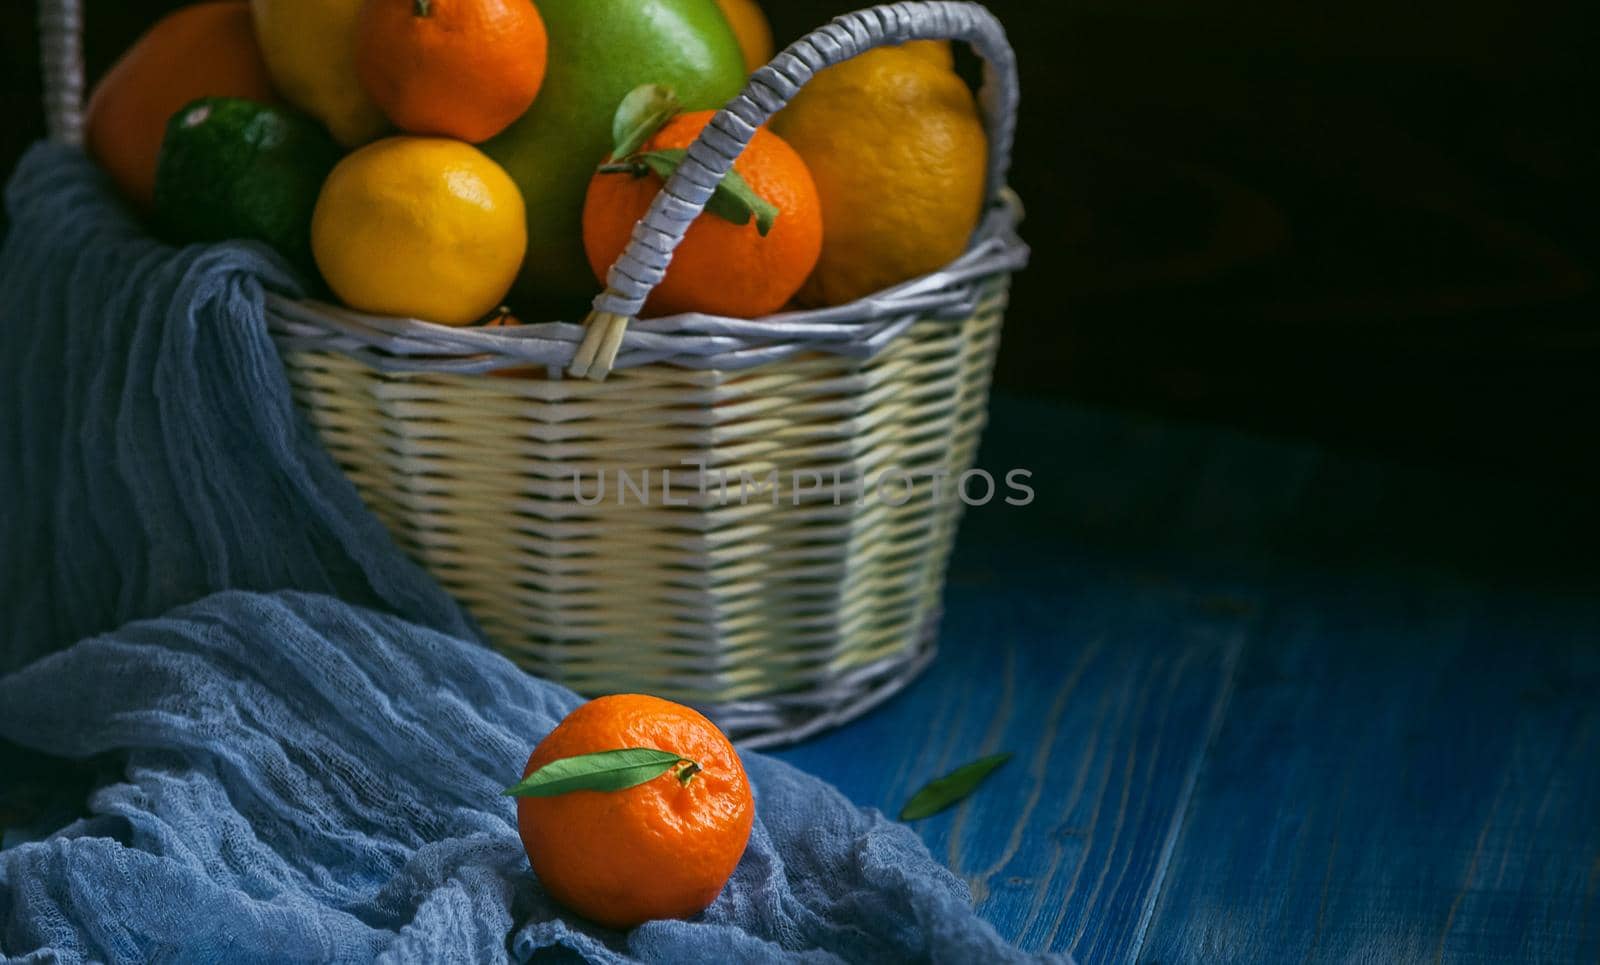 citrus fruits in a wicker basket on a wooden background by vvmich